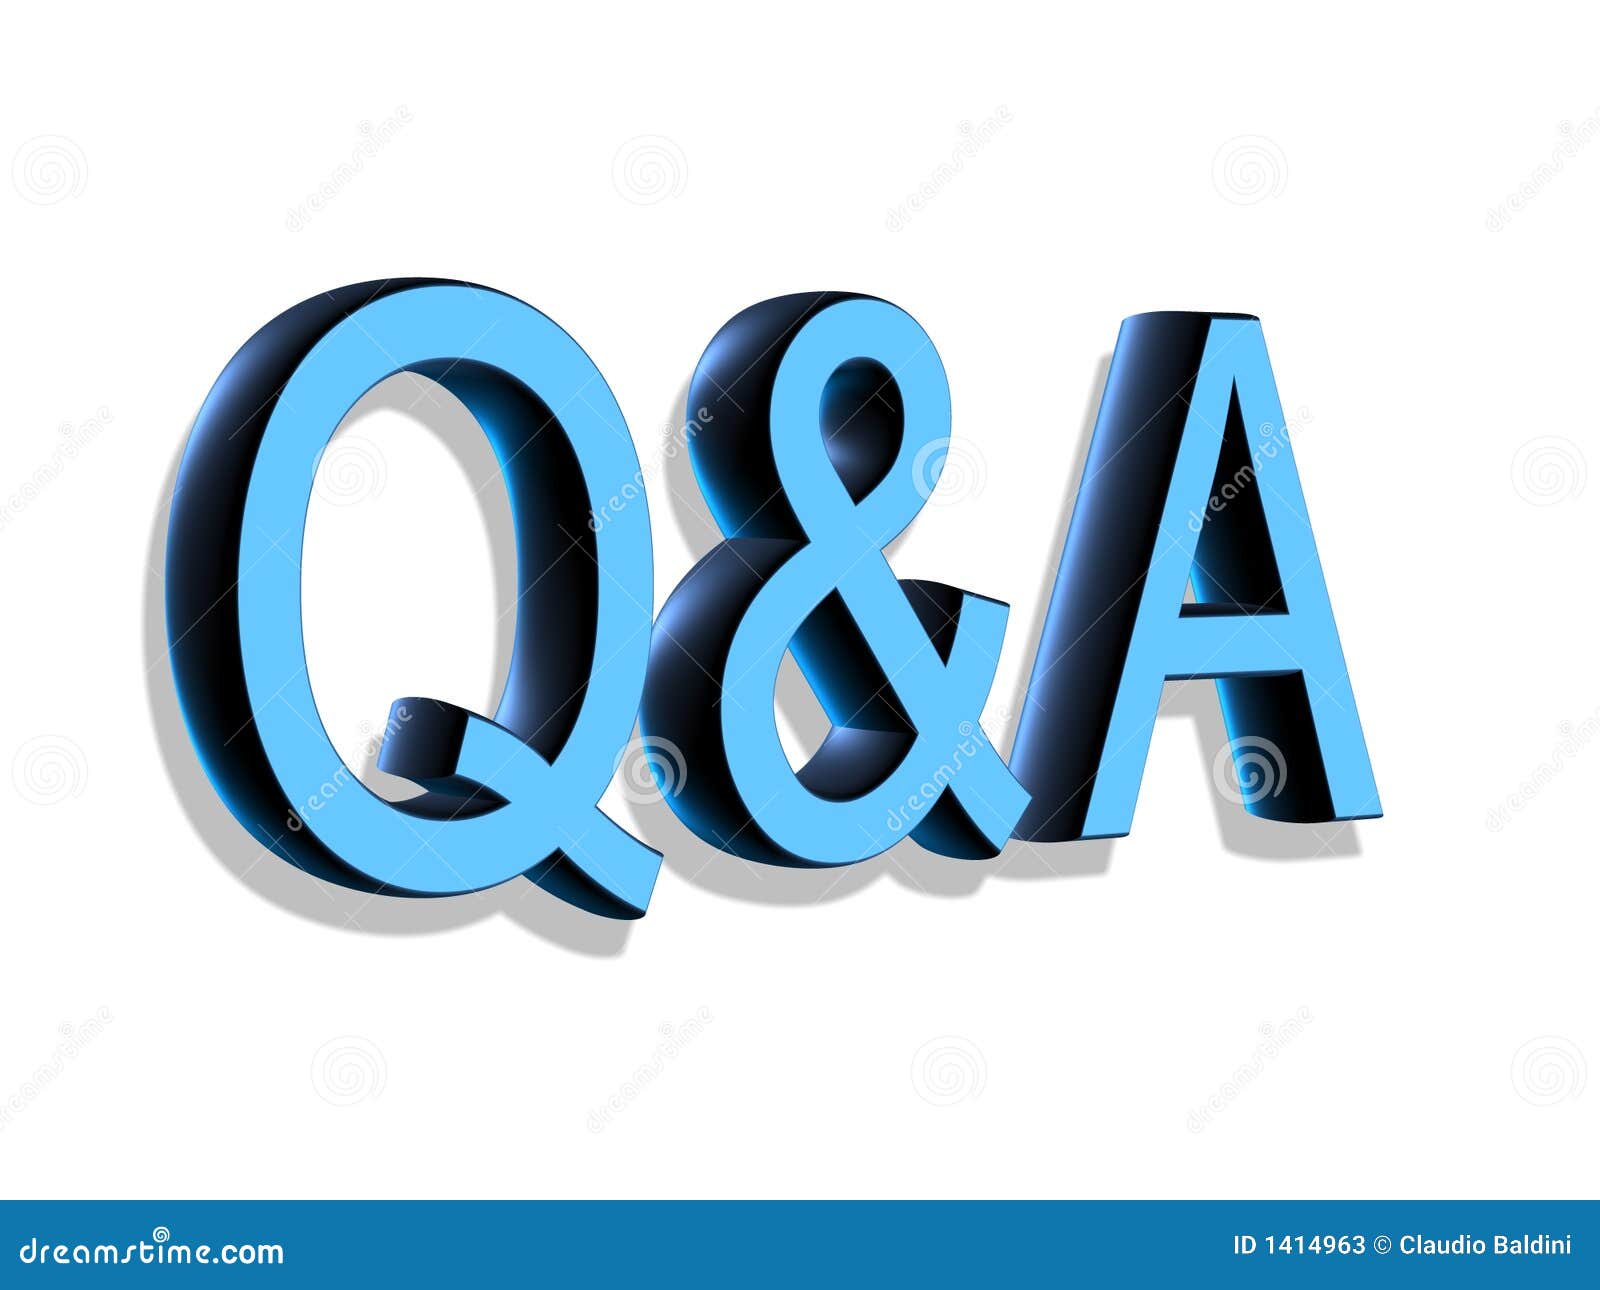 clipart of question and answer - photo #24